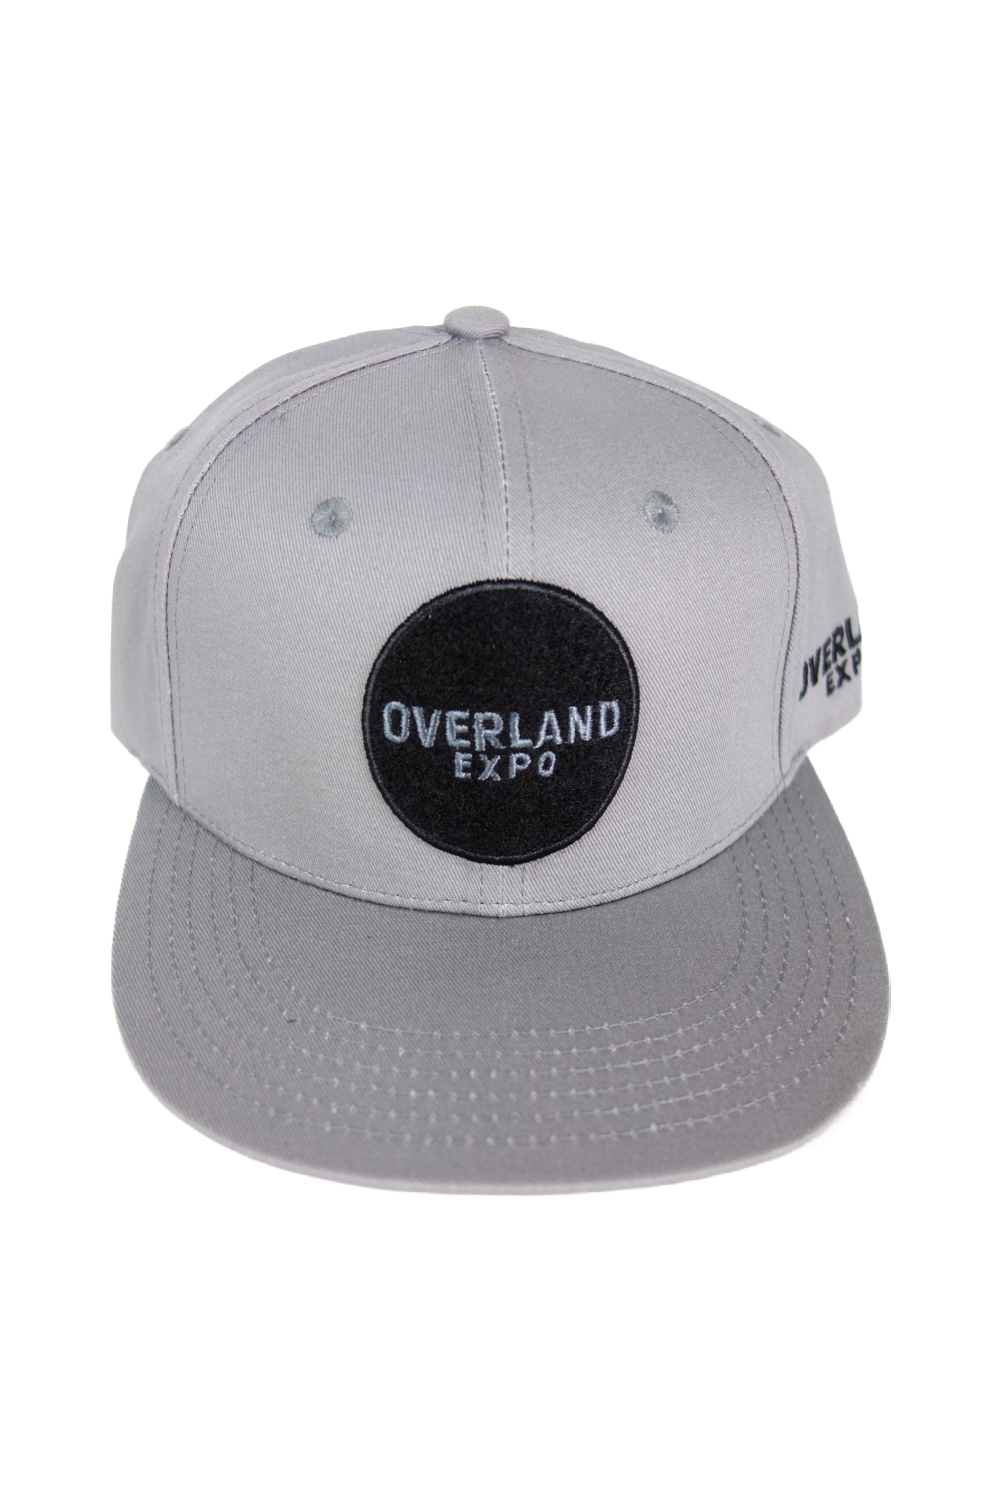 Overland Expo - Design Your Own - Flat Billed - Velcro Patch Hat